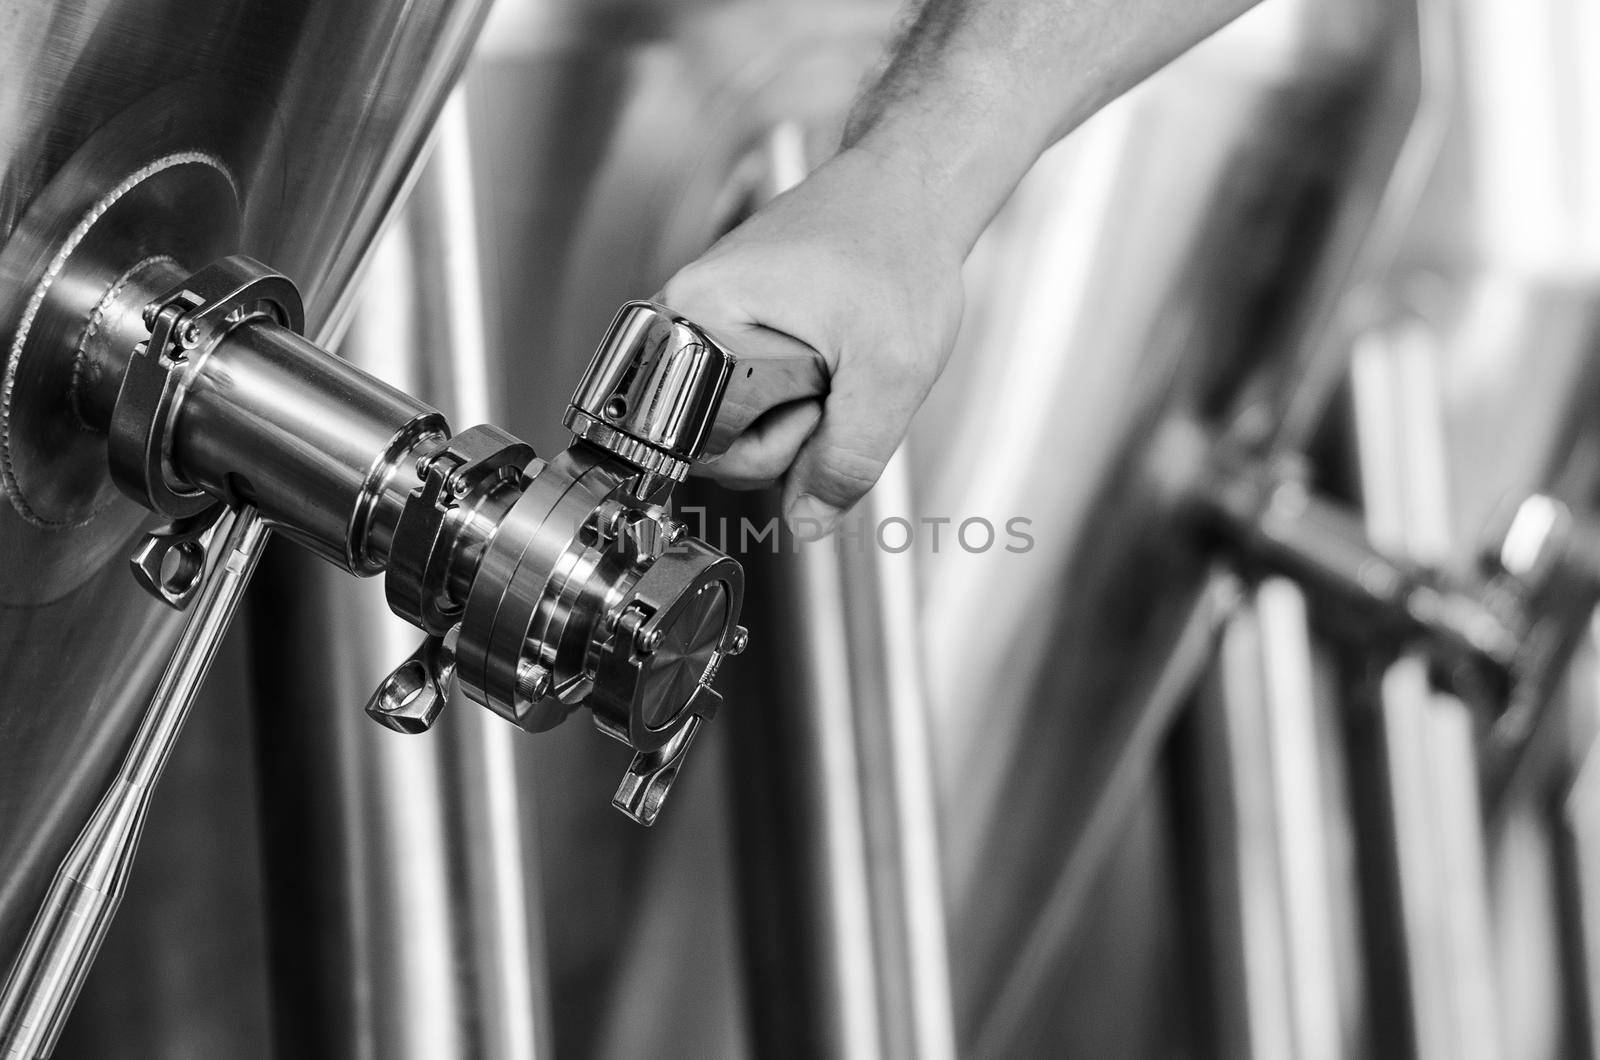 brewer operating industrial beer brewing equipment in brewery interior by jackmalipan